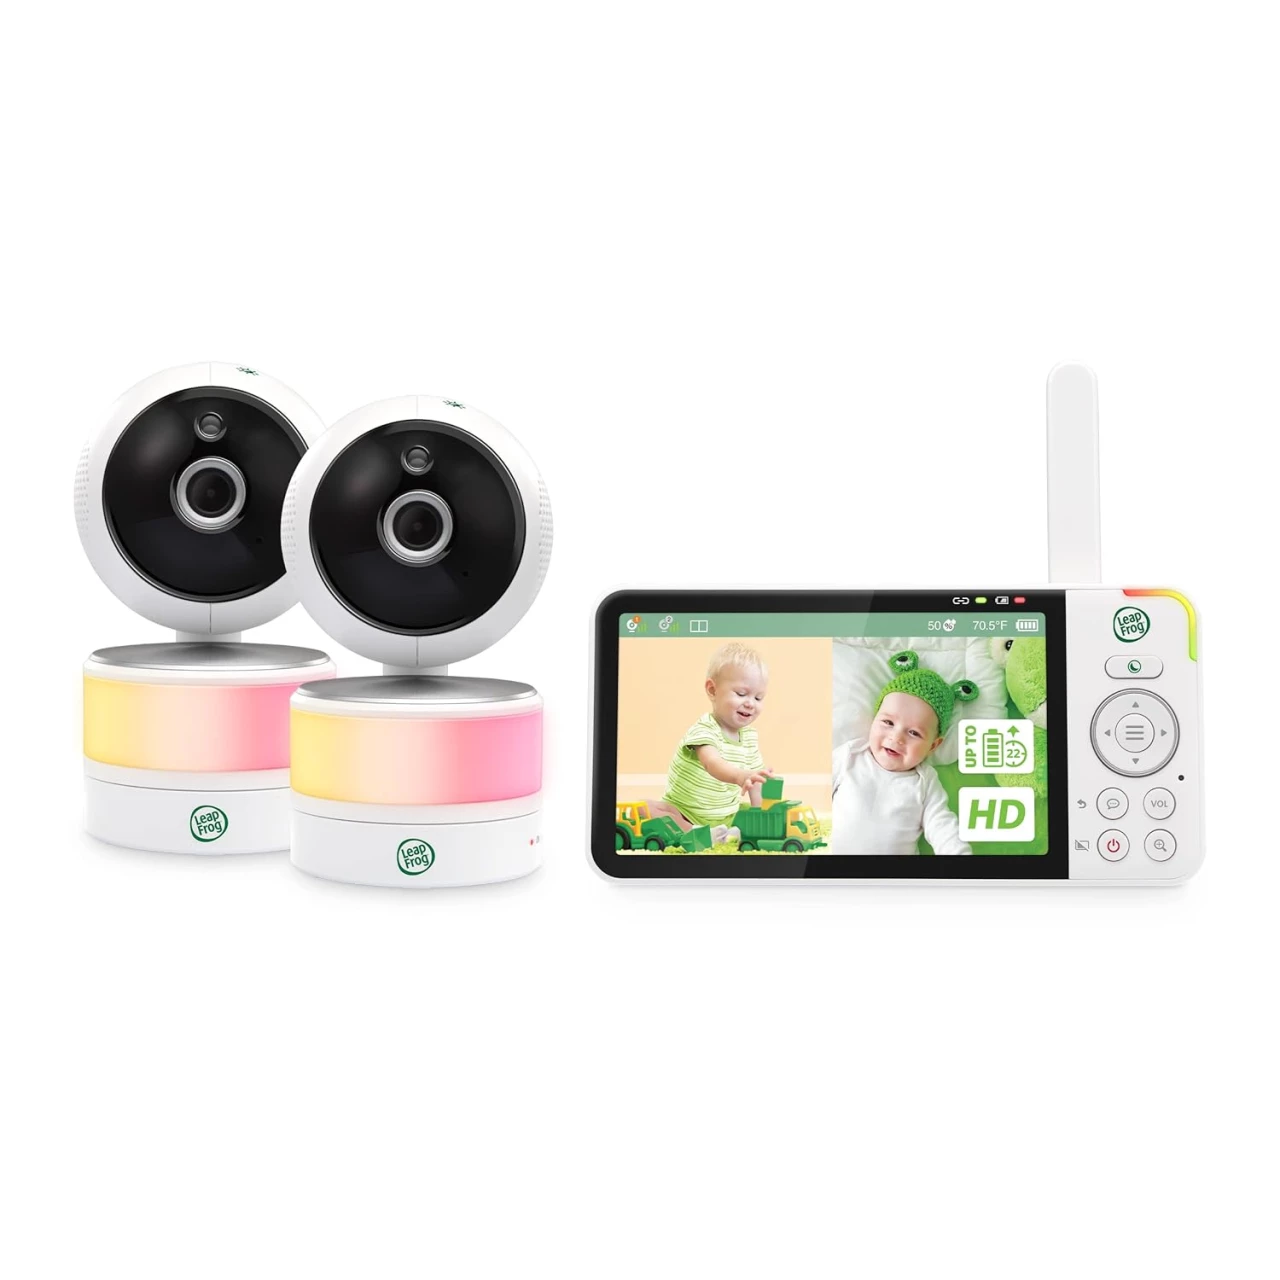 LeapFrog LF915-2HD Video Baby Monitor with 2 Camera, 5” 720p HD LCD Display, 360° Pan &amp; Tilt with 8X Zoom Cameras, Color Night Vision, Night Light, Two-Way Intercom, Smart Sensors